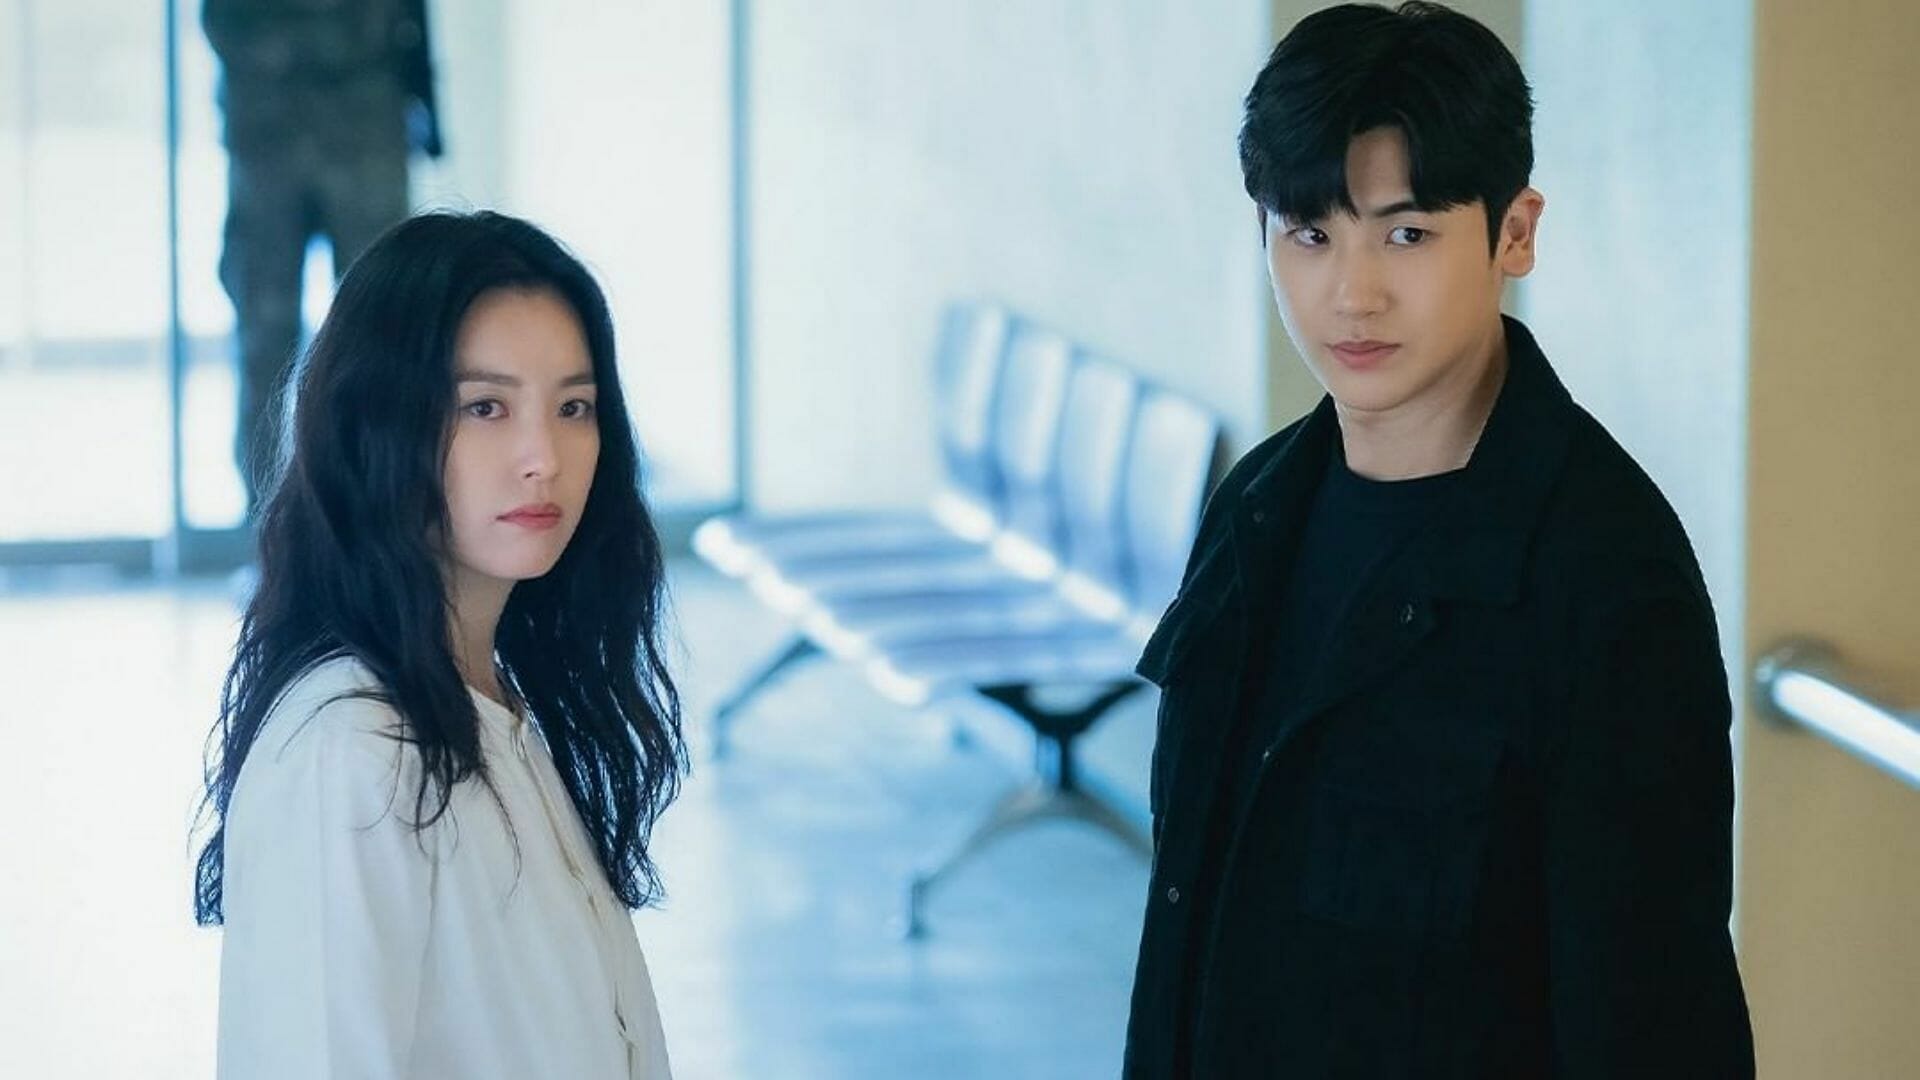 K Drama Happiness Episode 7: November 26 Release, Where To Watch And What To Know Before Watching?